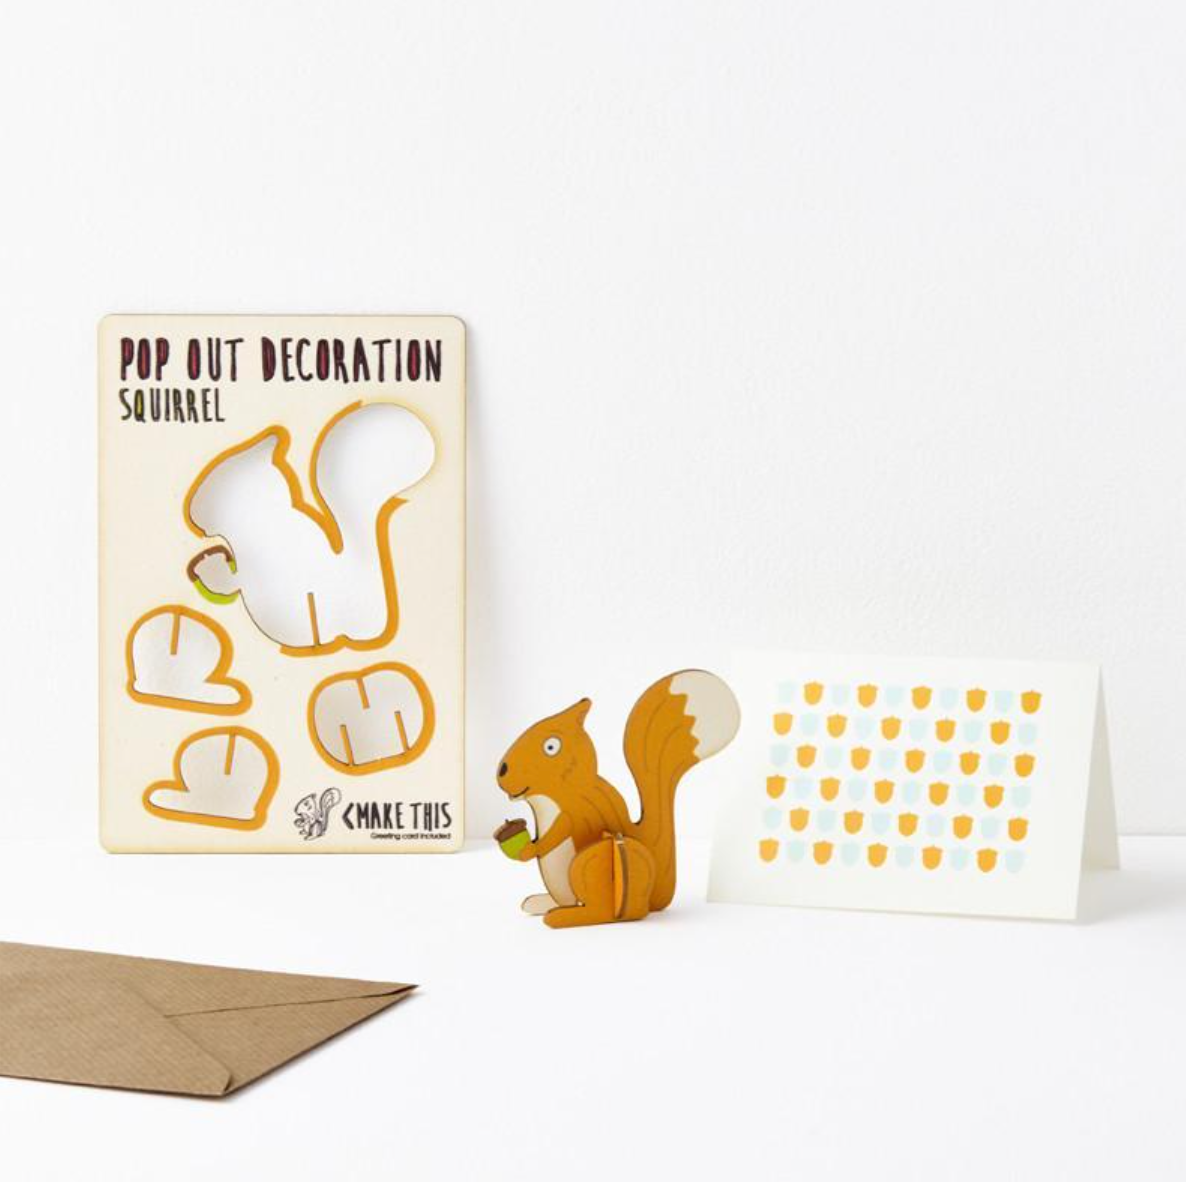 Squirrel Pop Out Decoration and Card